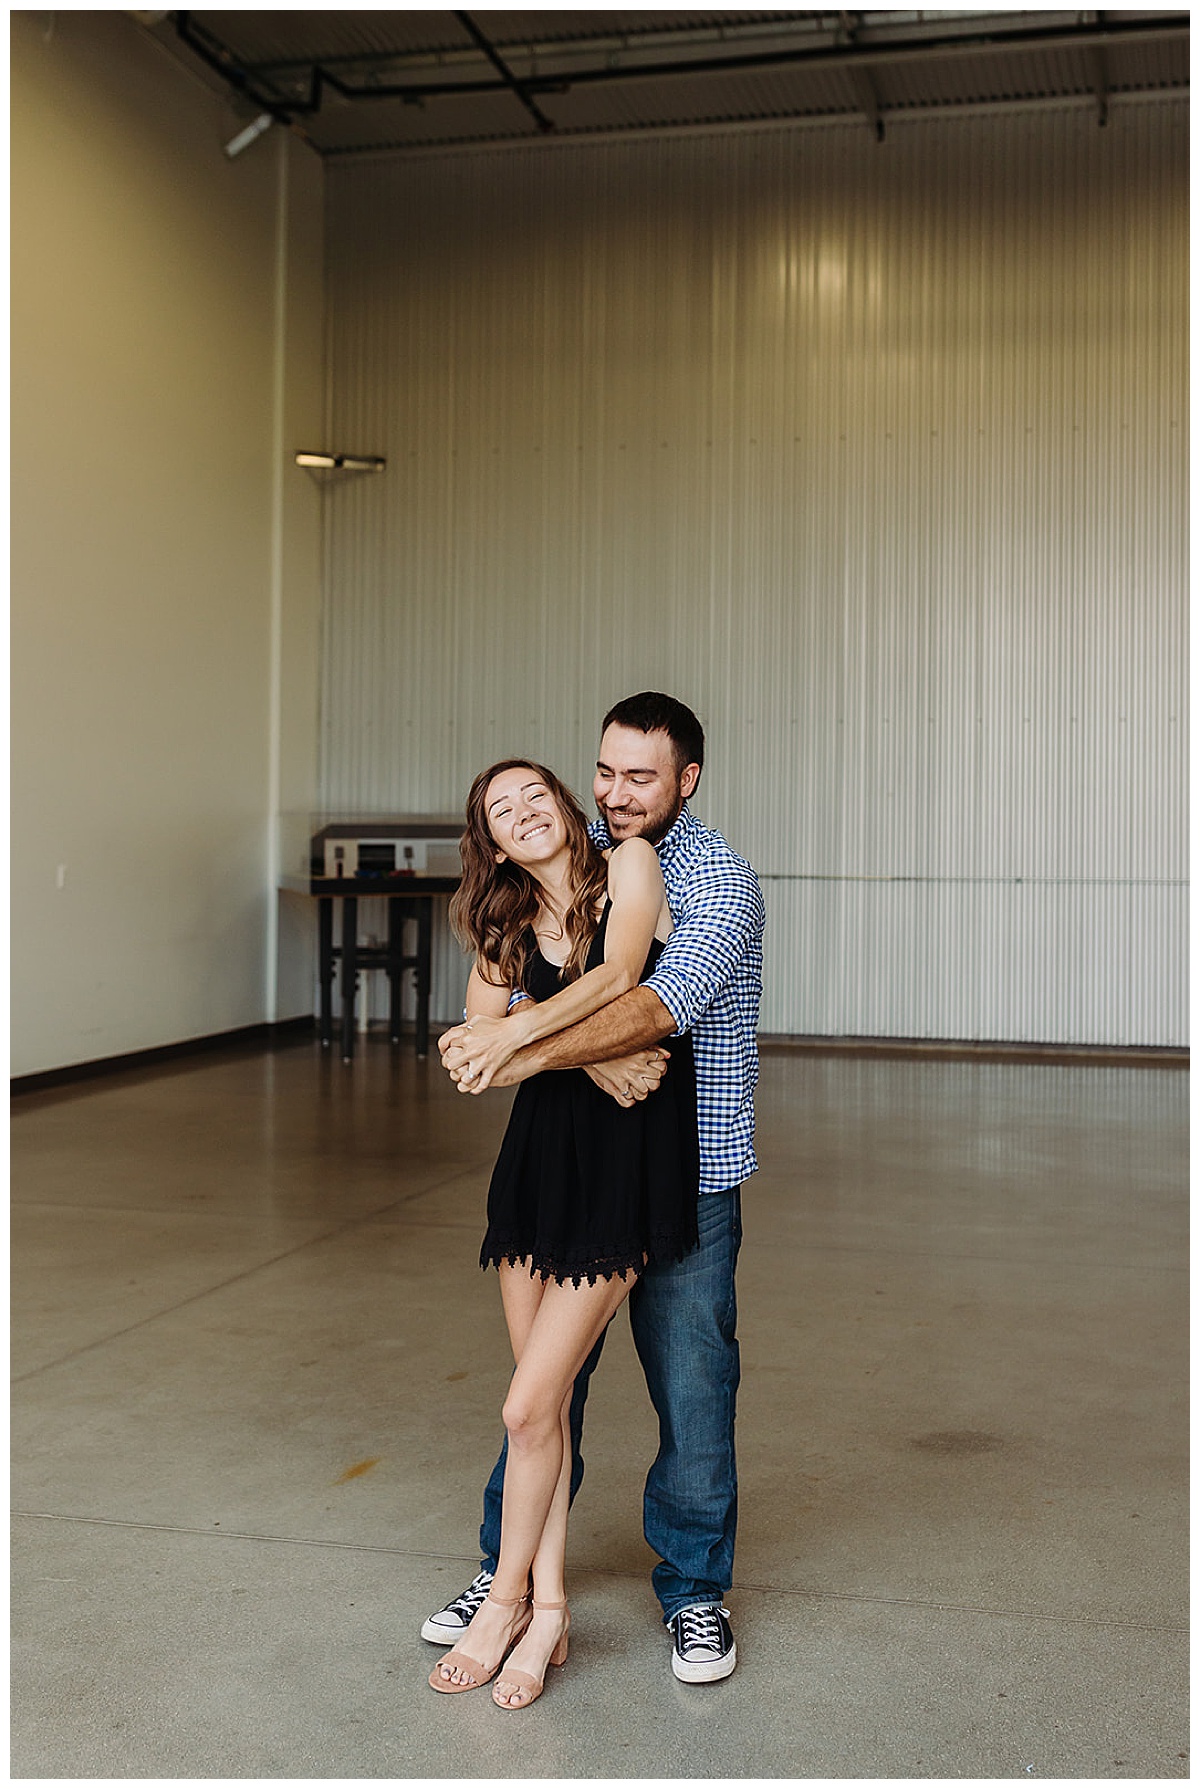 Couple smile and dance together for Kayla Bouren Photography